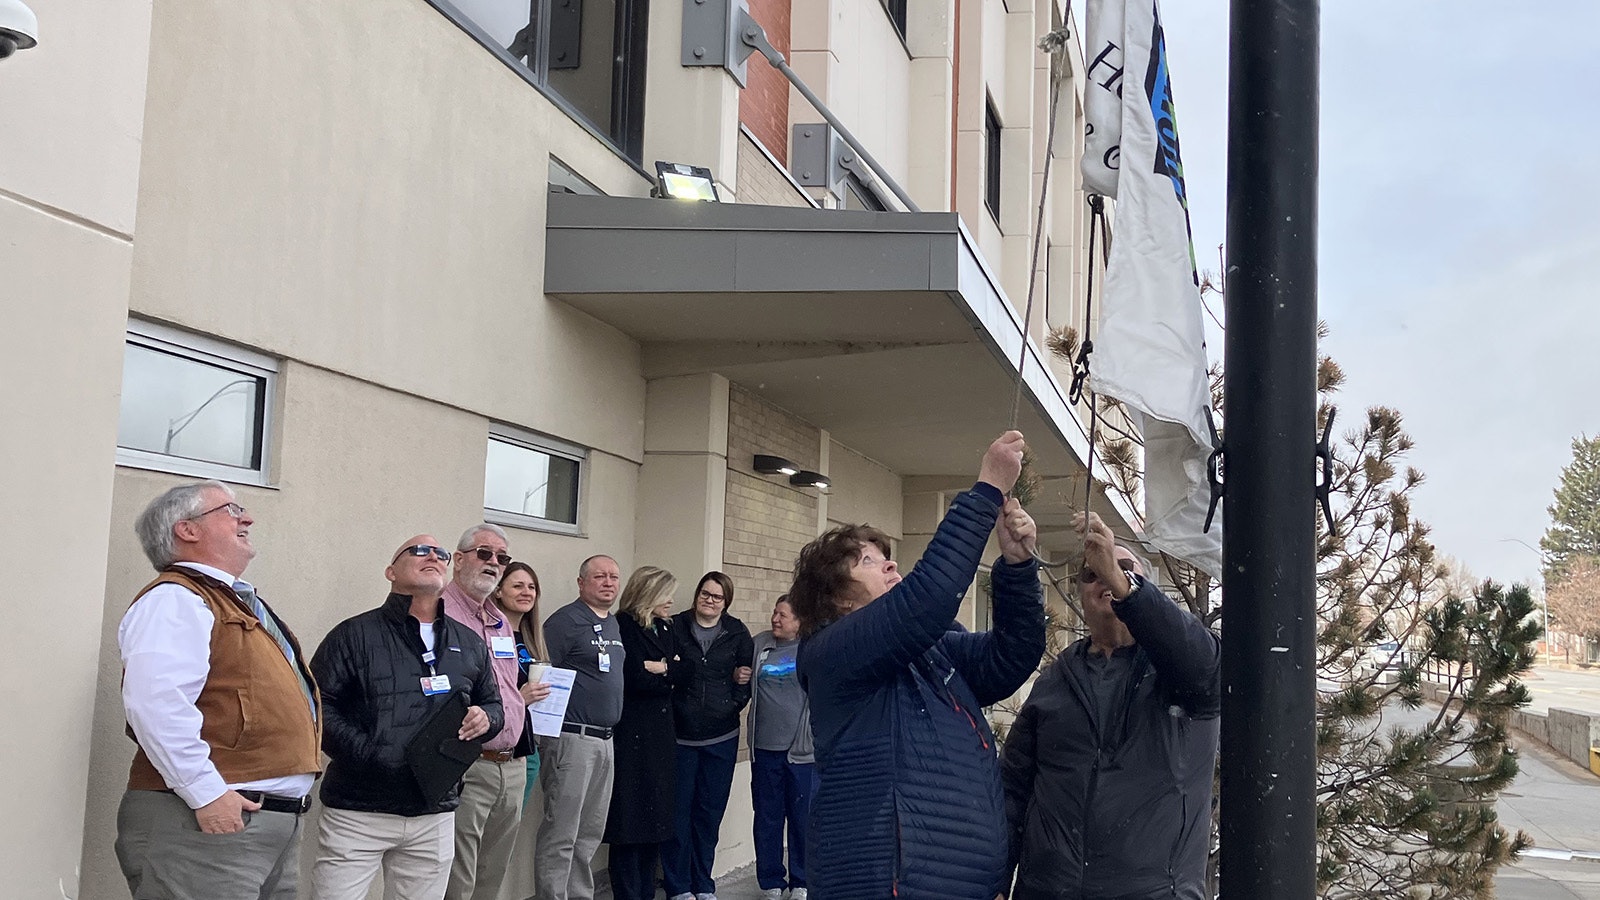 As part of her desire to give back, Anne Bina is a volunteer advocate for Donor Alliance. On Monday she helped raise a donor flag at Banner Wyoming Medical Center in Casper.